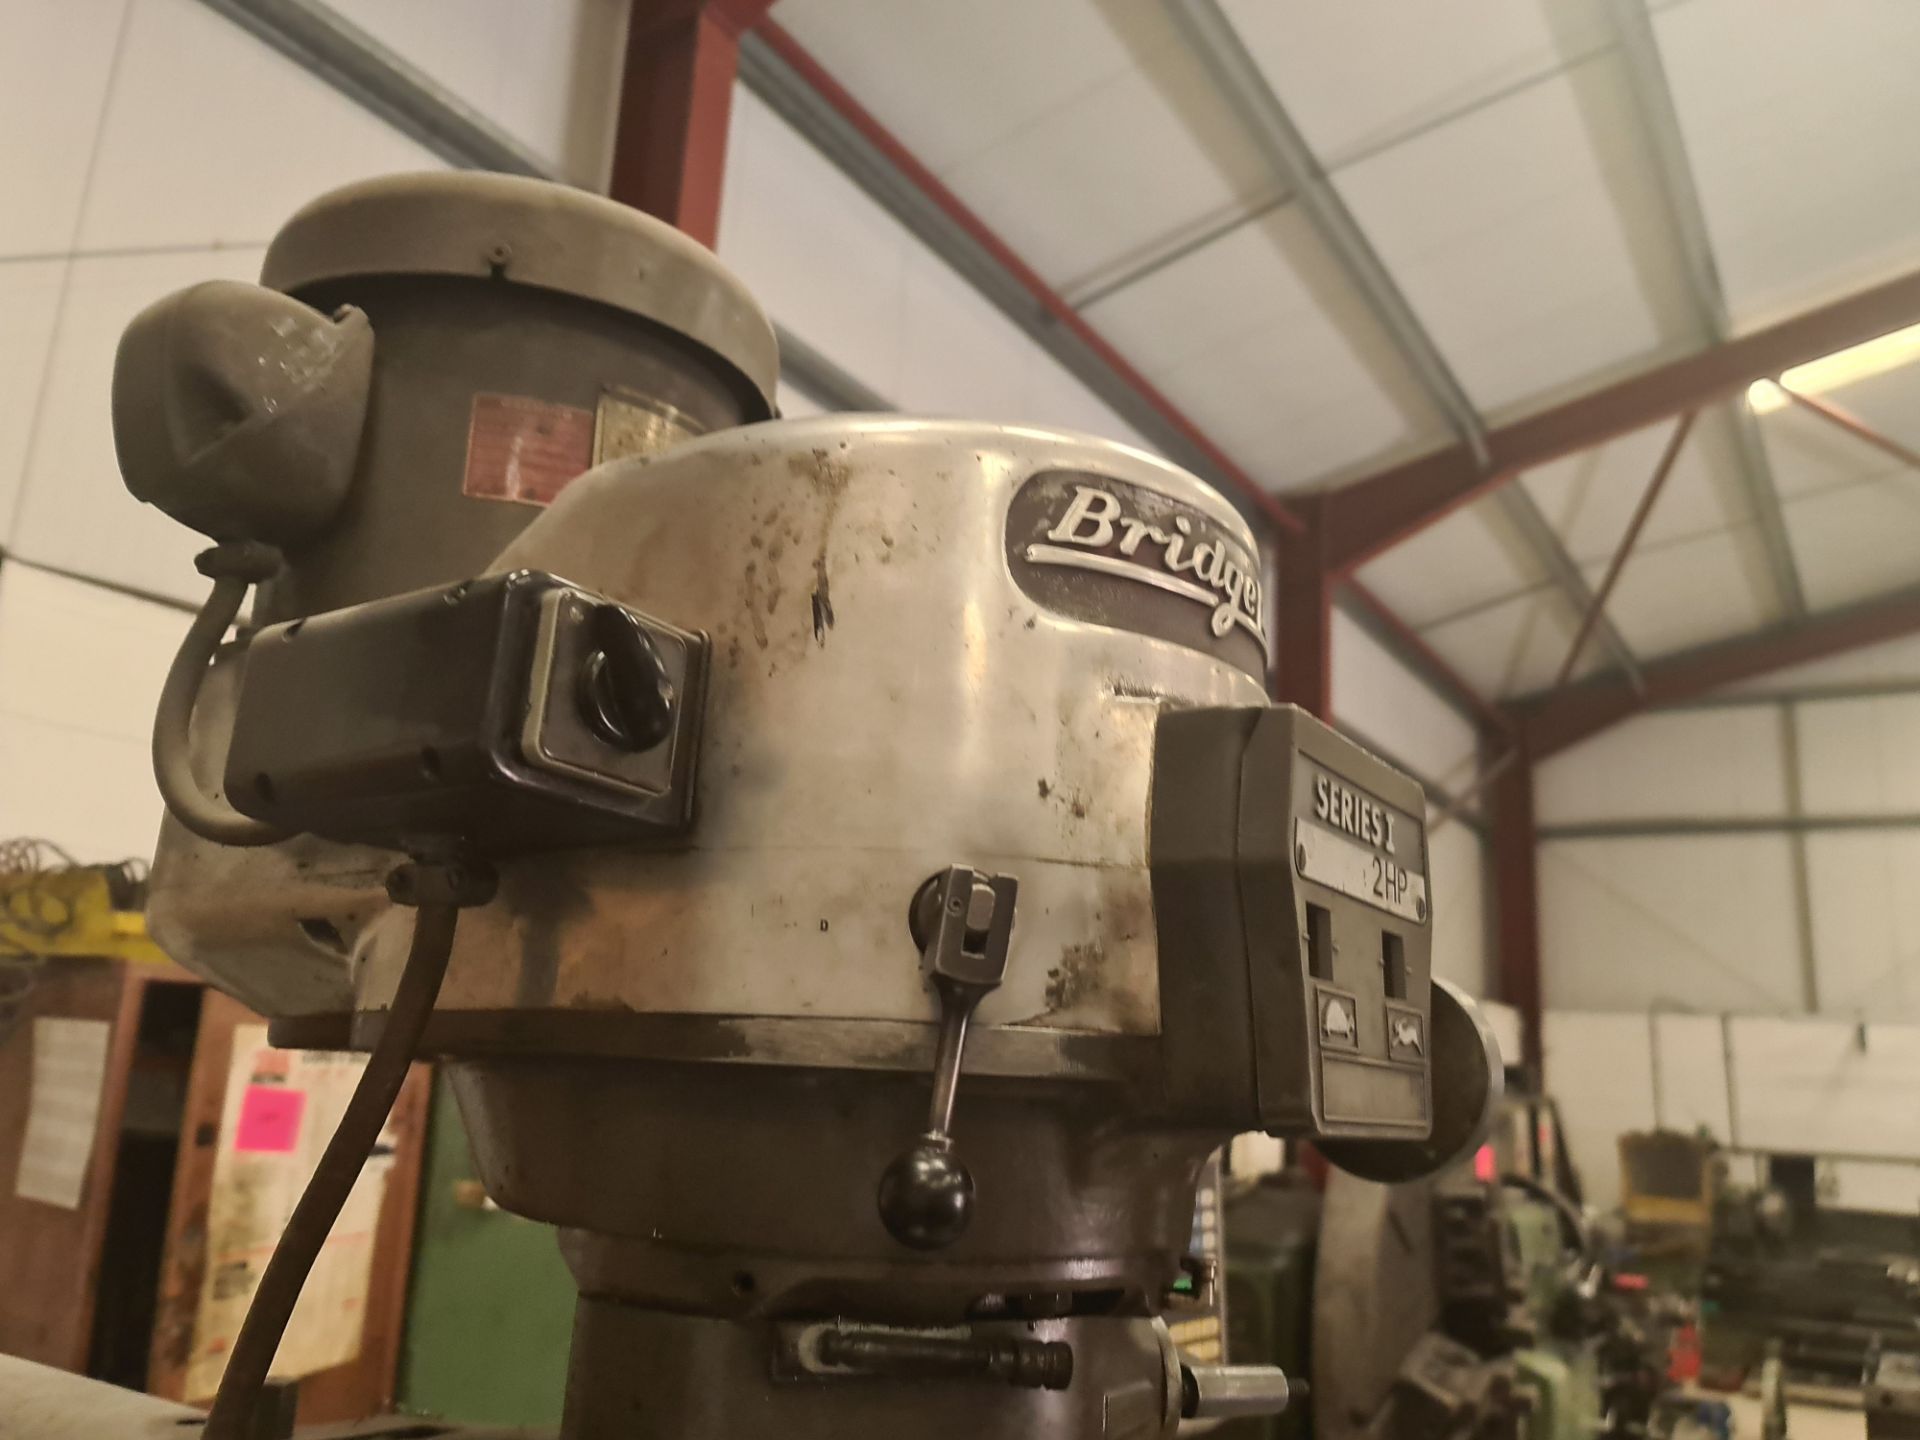 Bridgeport series 1 2hp turret mill with Acu-Rite DRO. Includes the tooling located on the machine - Image 23 of 27